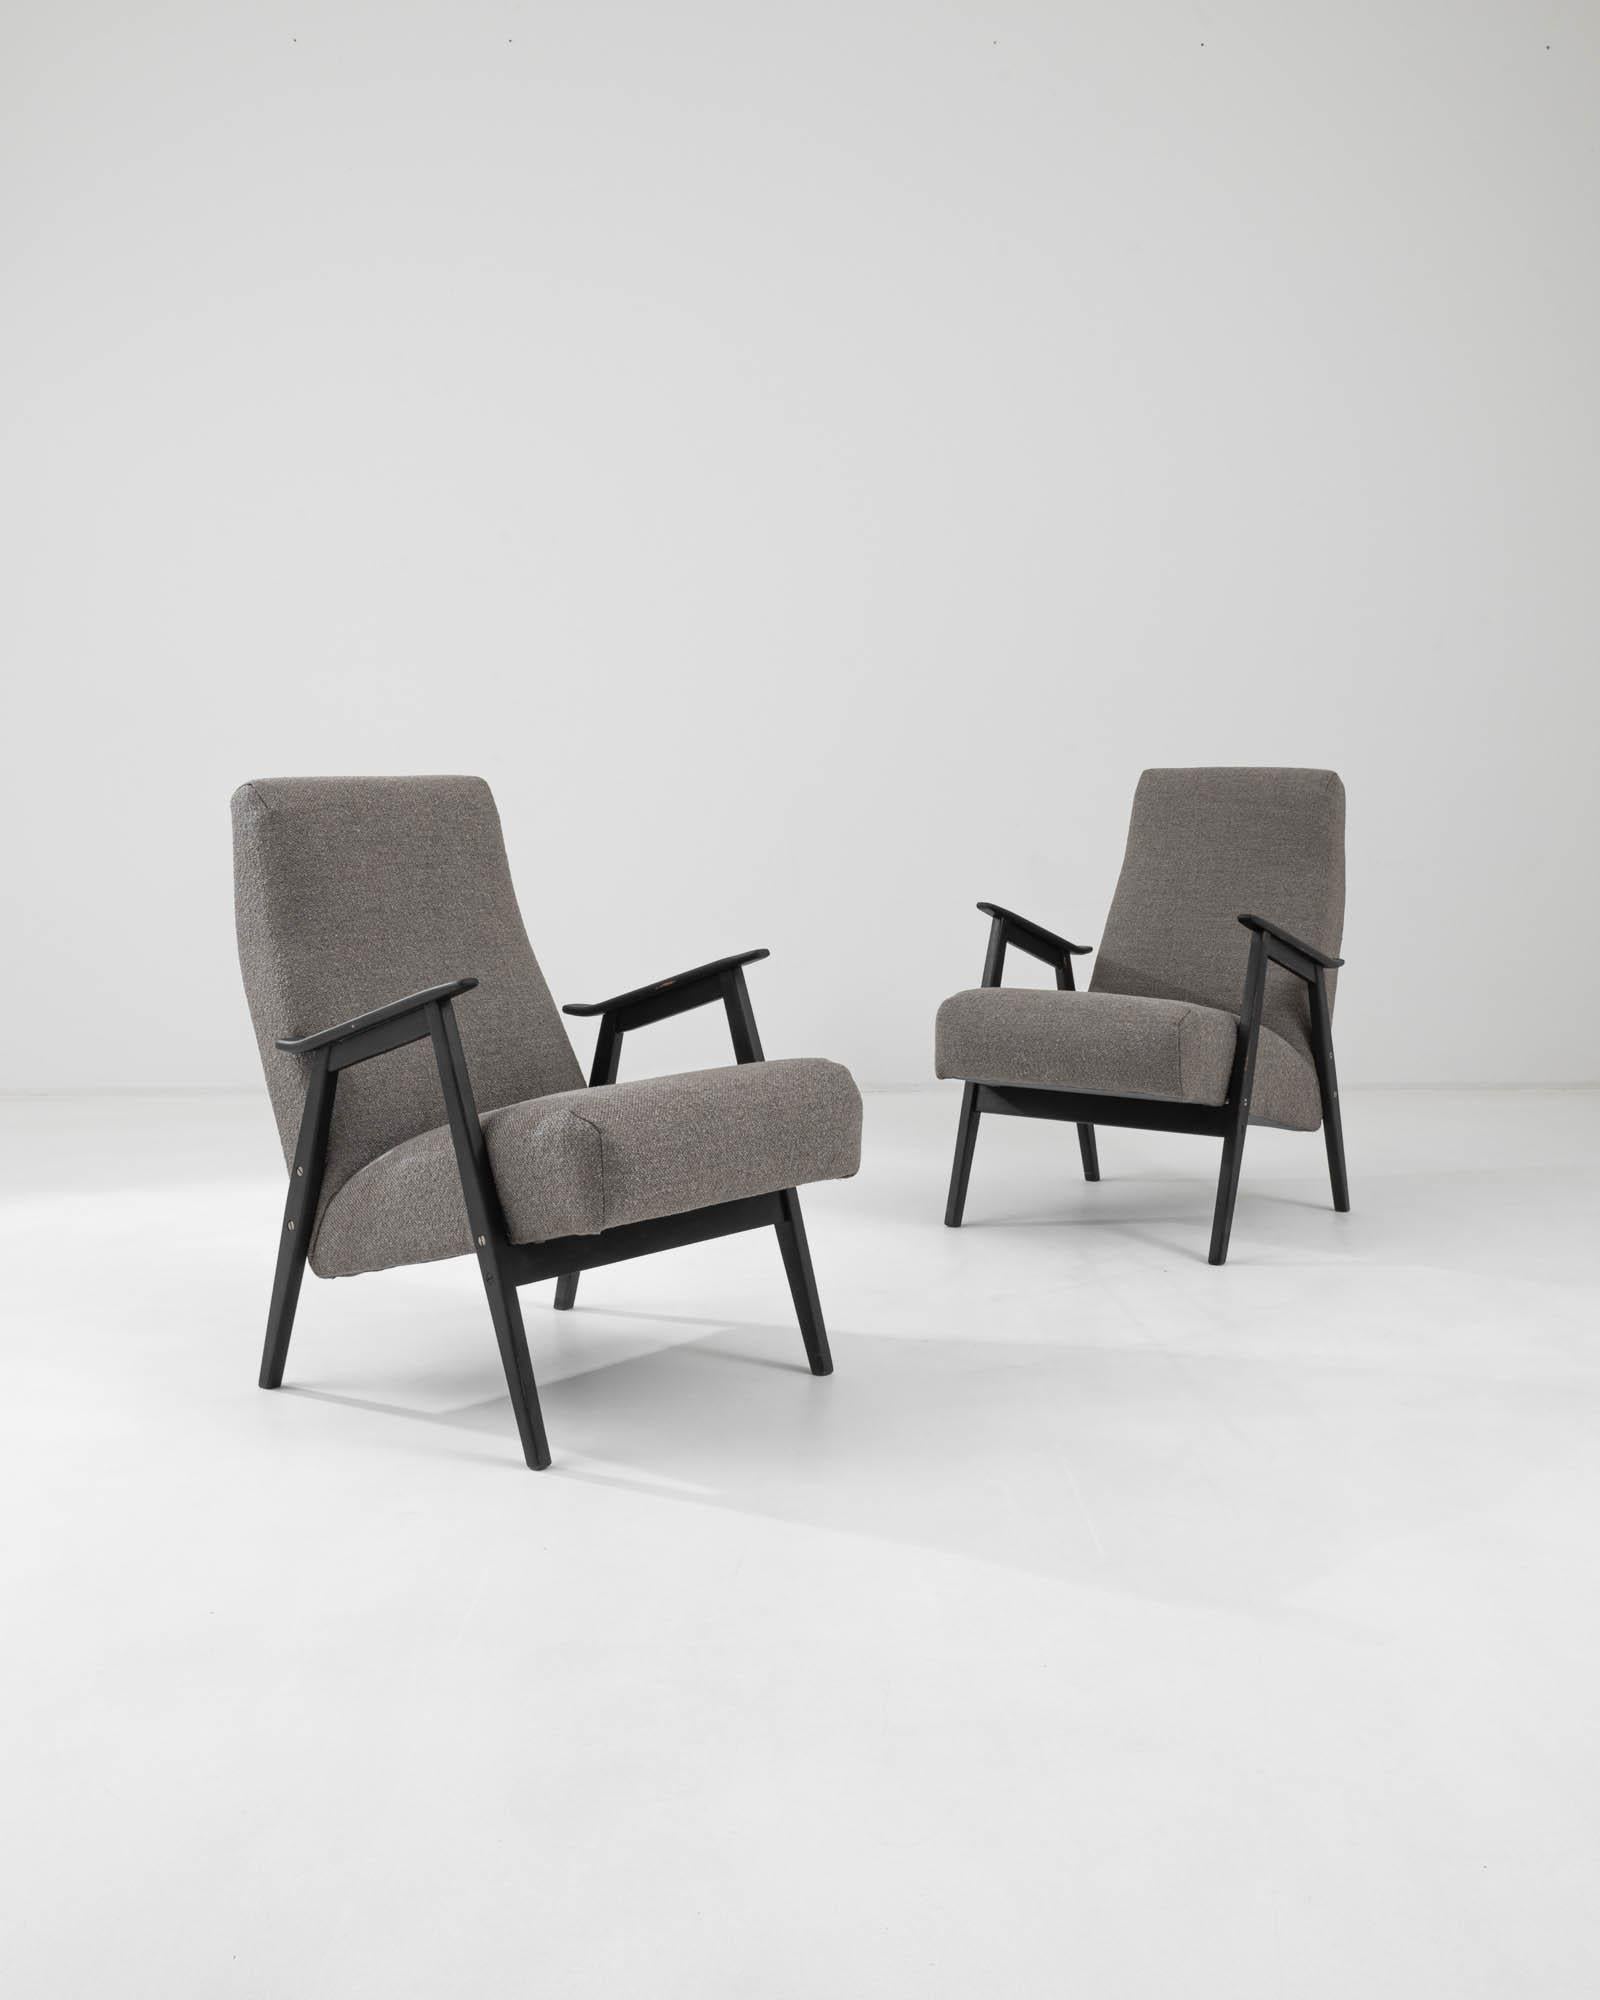 This pair of 1960s Czech armchairs provide the perfect nook in which to watch the world go by. The seat, generously cushioned and set at an inviting recline, seems to float like a cloud between the branches of the angular wooden frame. The grey